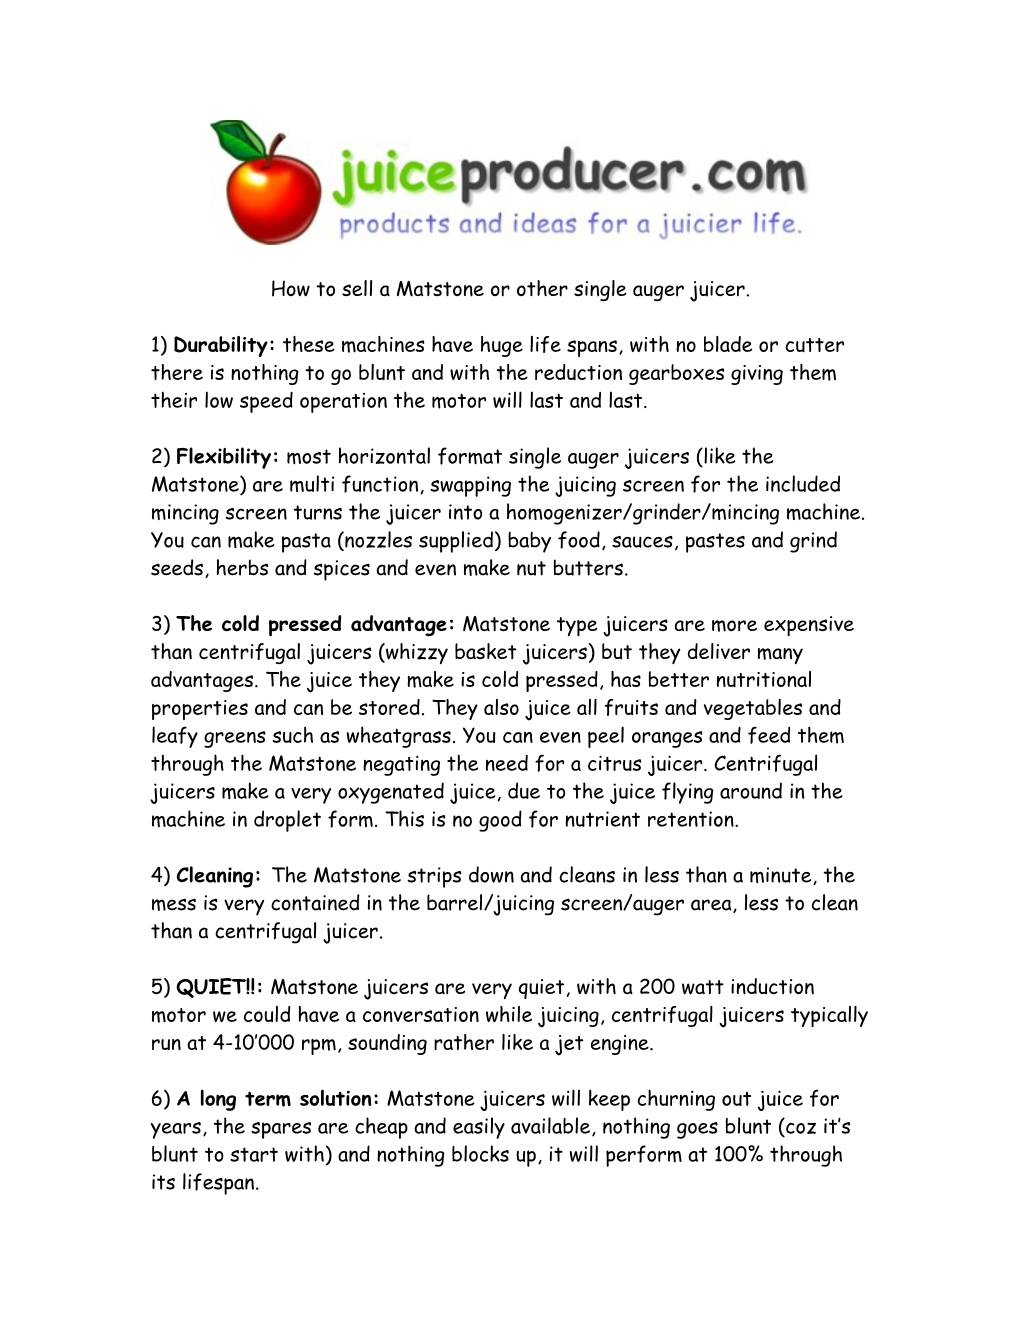 How to Sell a Matstone Or Other Single Auger Juicer